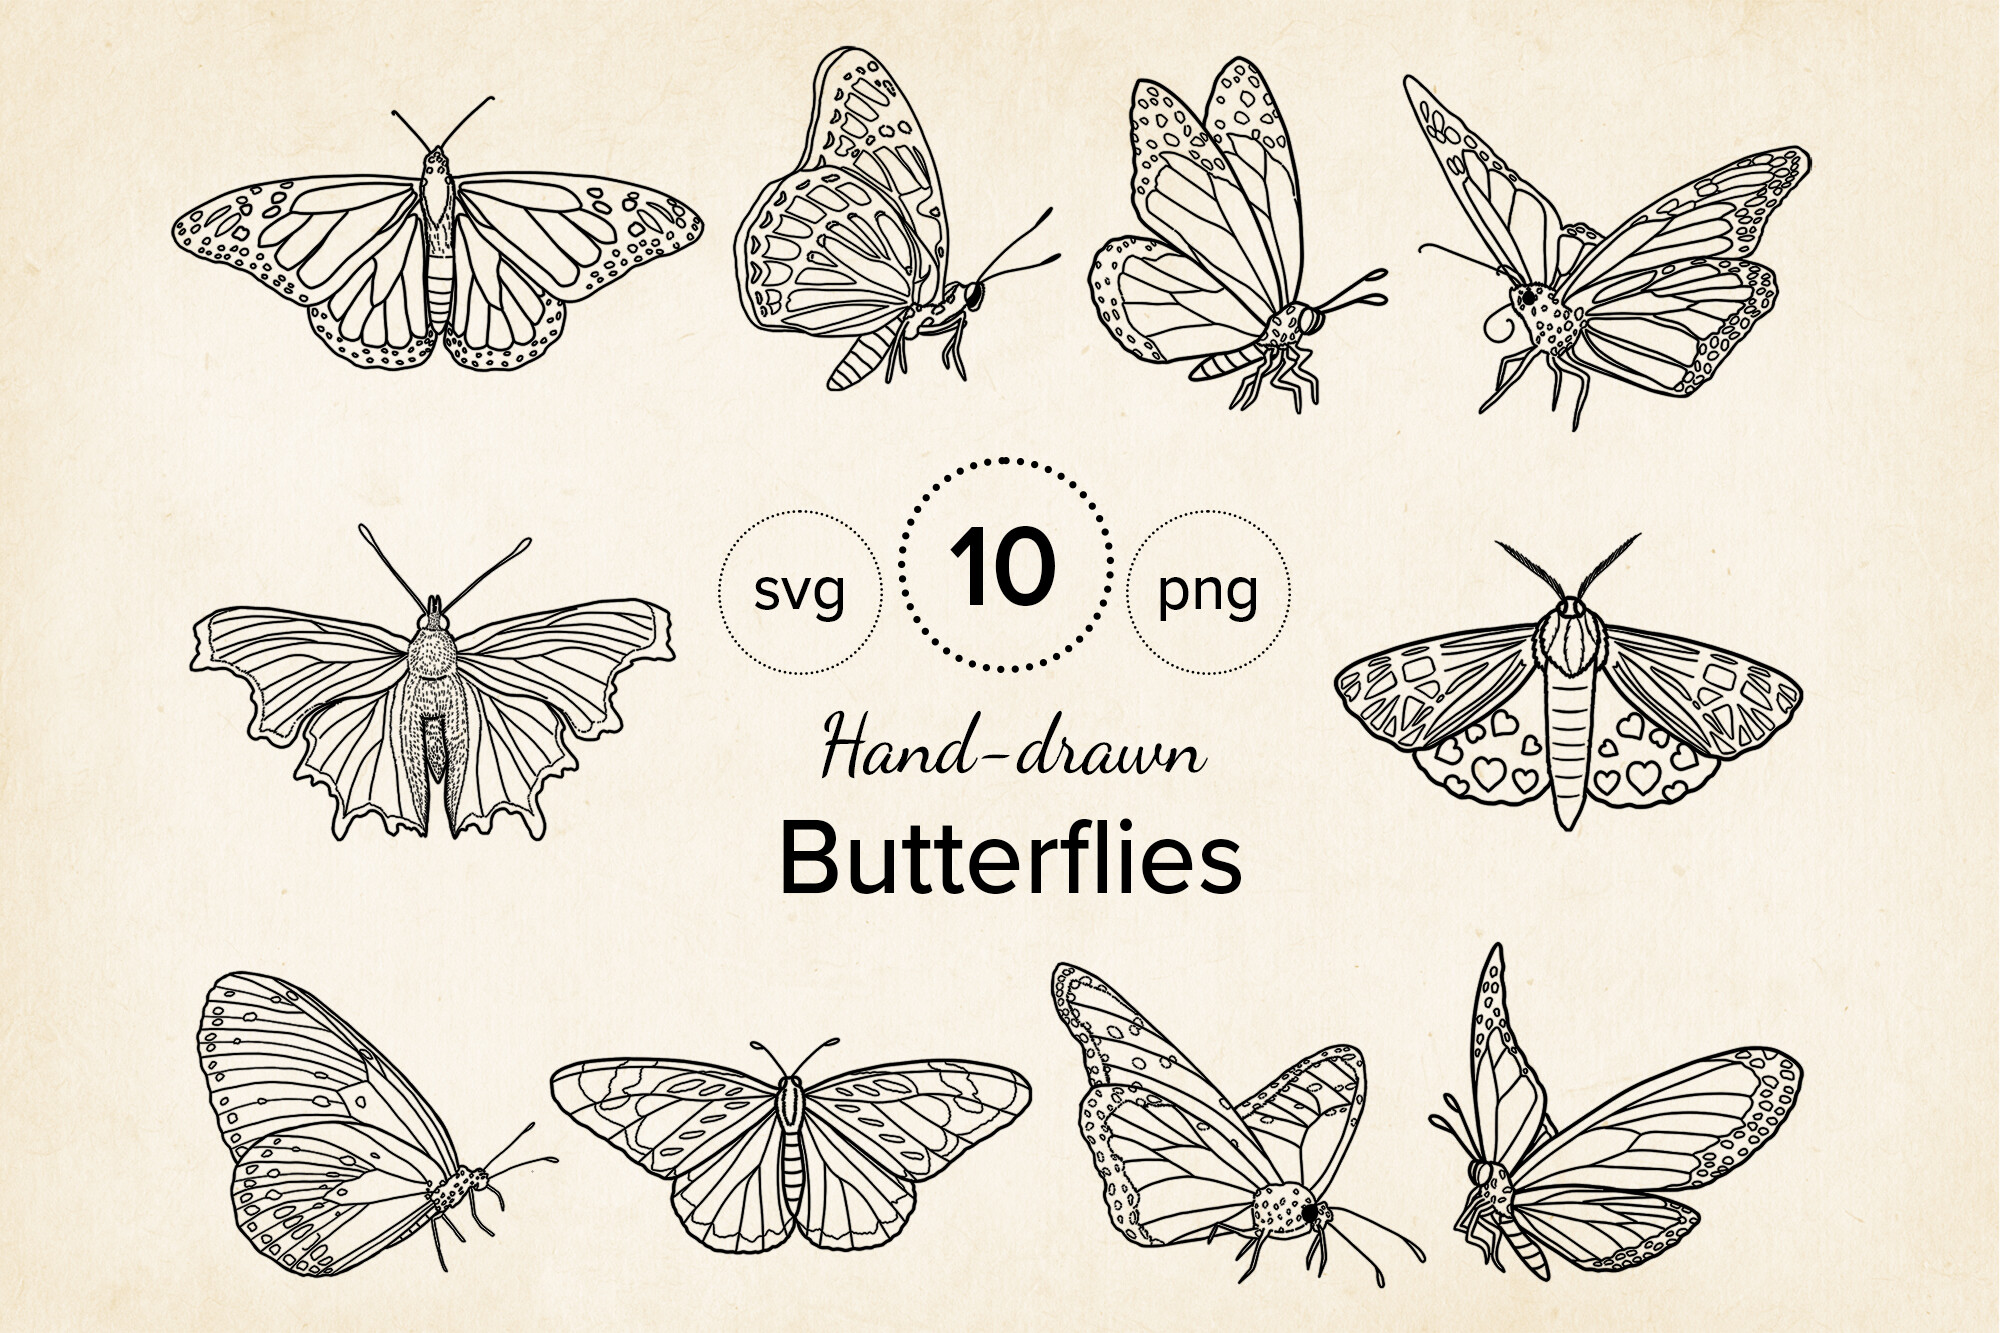 Hand-drawn Butterfly SVG & PNG Set Graphic by Paper Art Garden ...